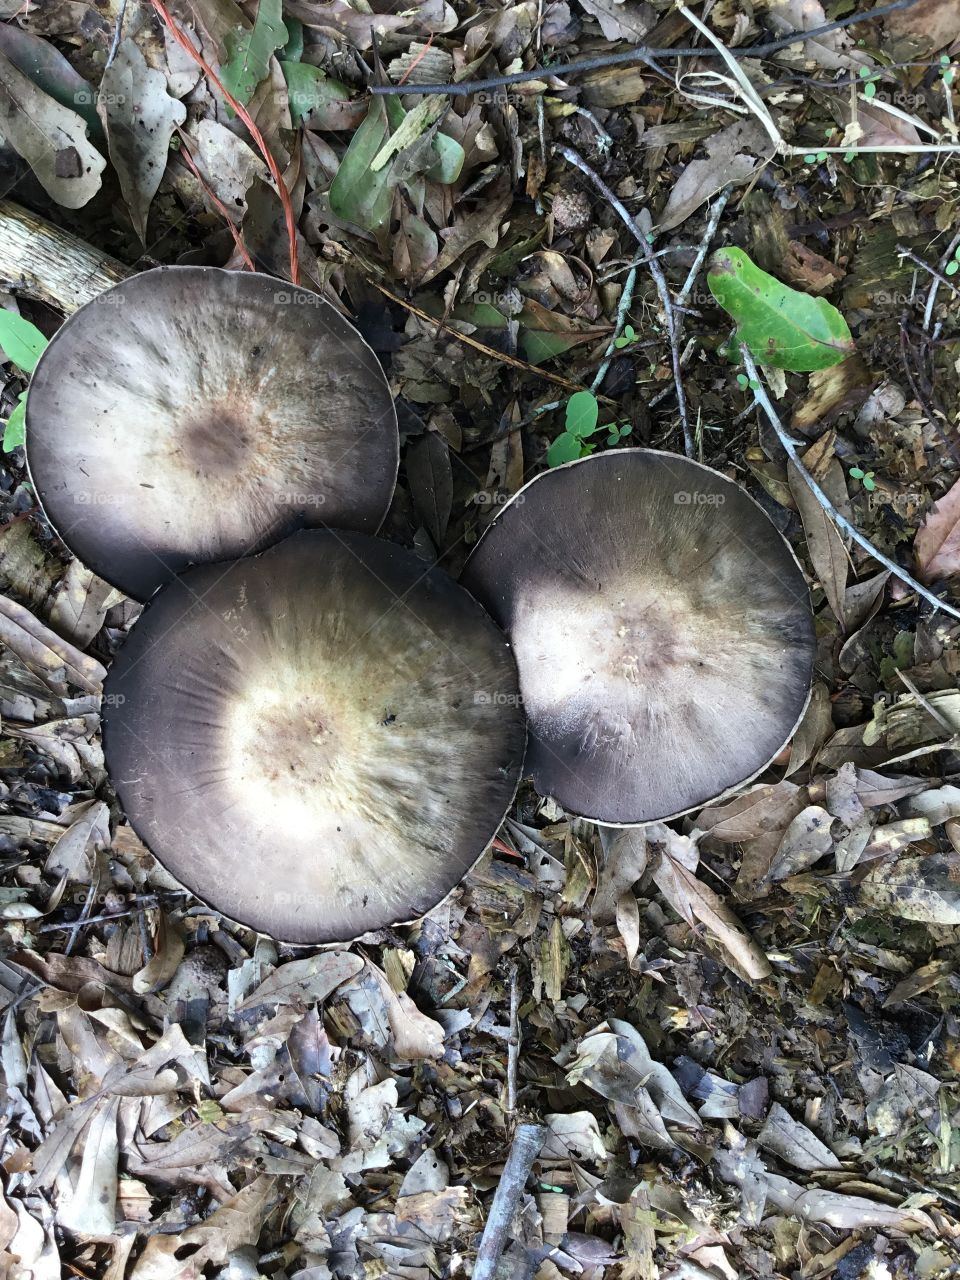 Trio of mushrooms hanging onto a hay string found in the South Georgia woods.